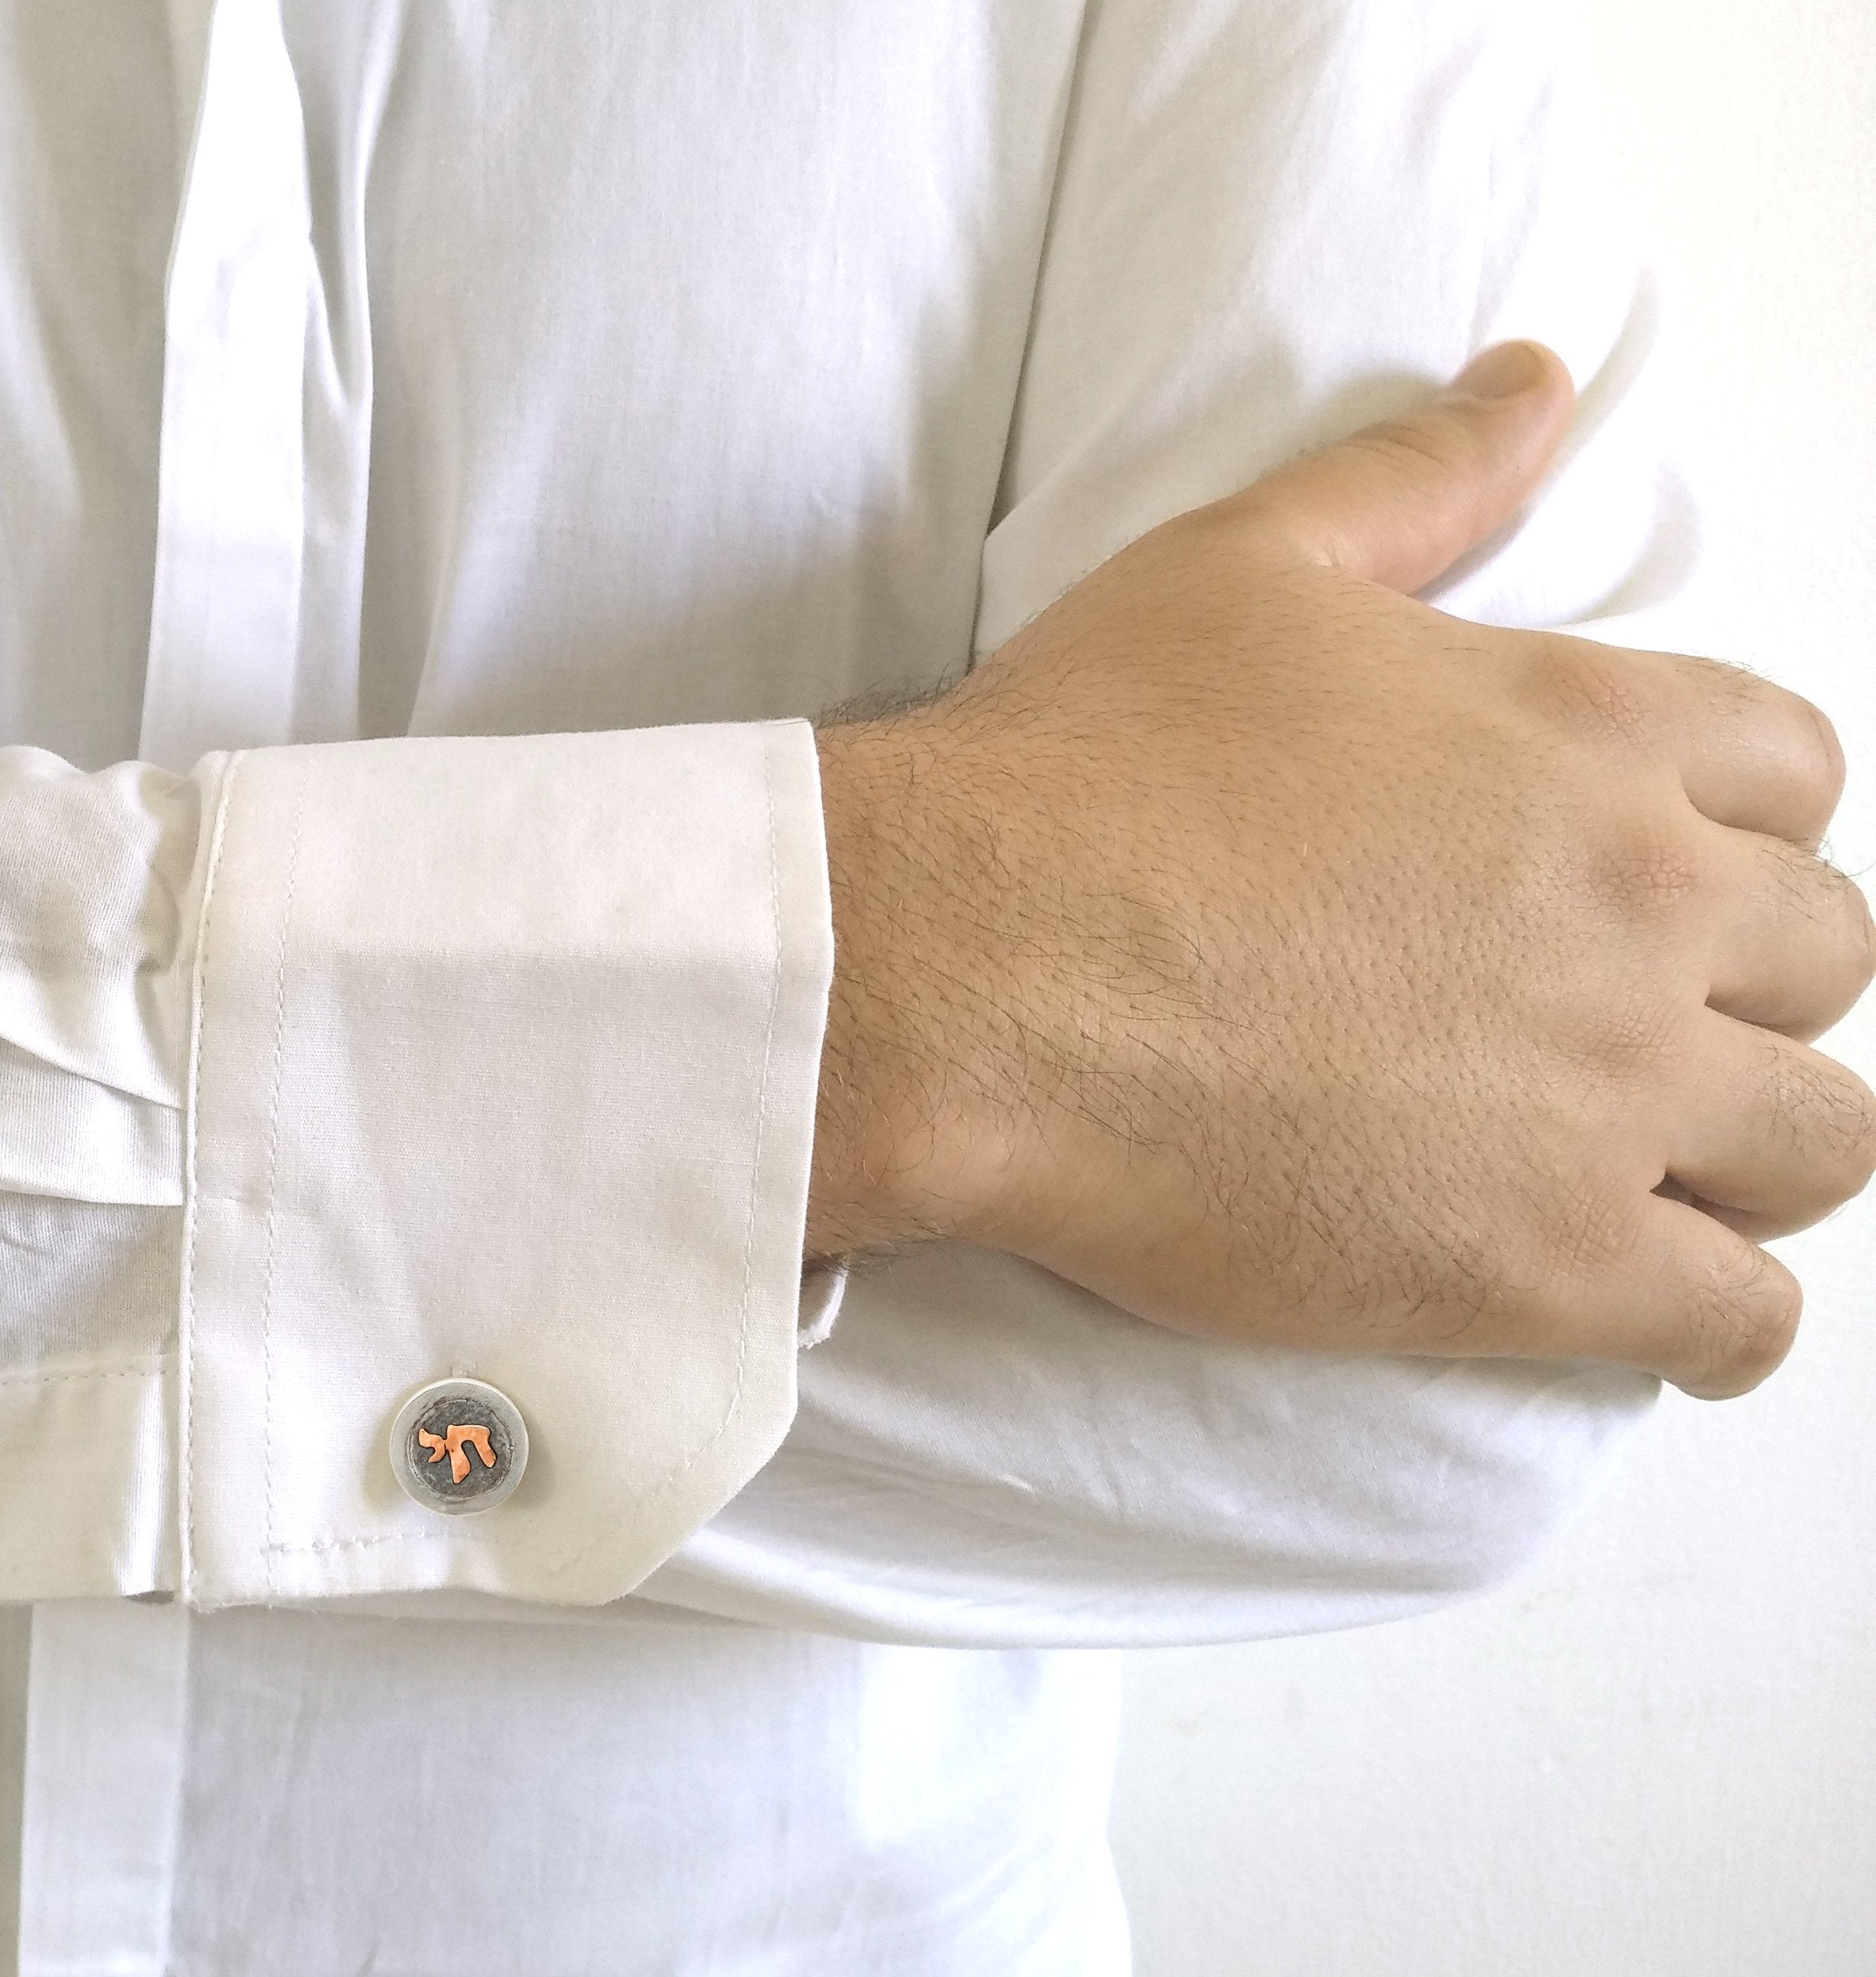 Silver & Red Gold Chai Cufflinks - Shulamit Kanter Official Store